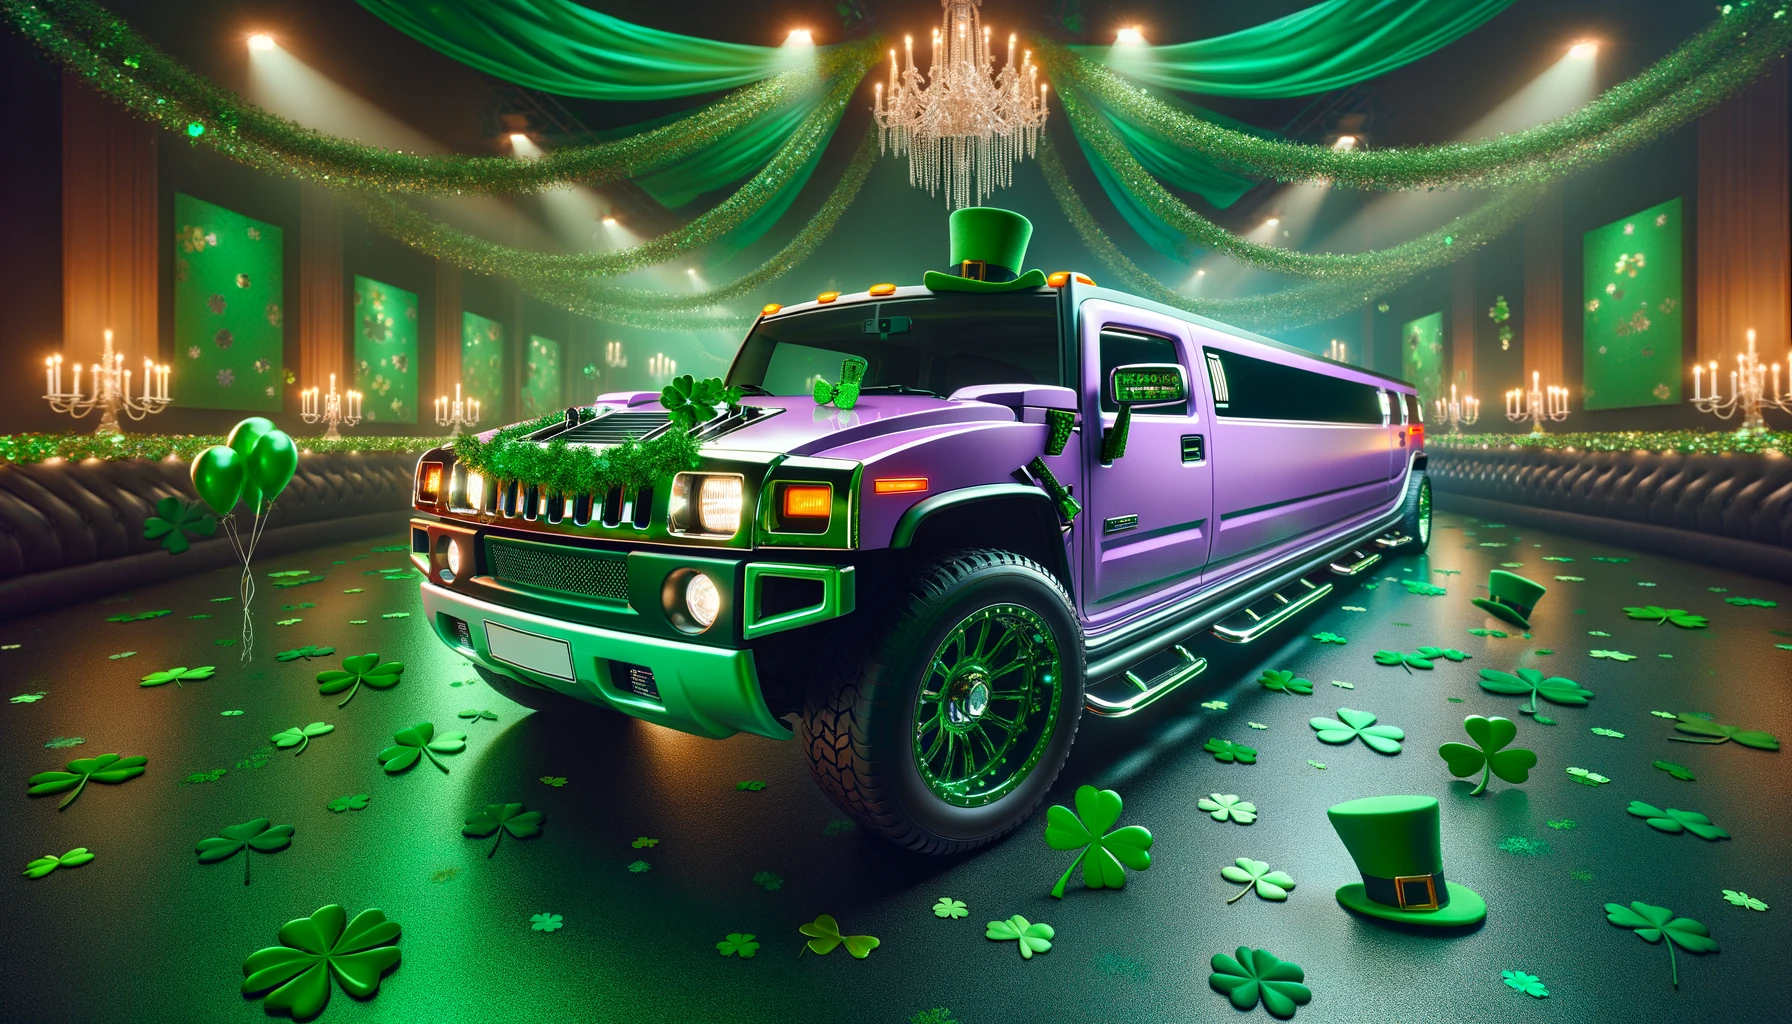 Orlando's St. Patrick's Day Festivities Reach New Heights with LimoVenture's Limo and Party Bus Services